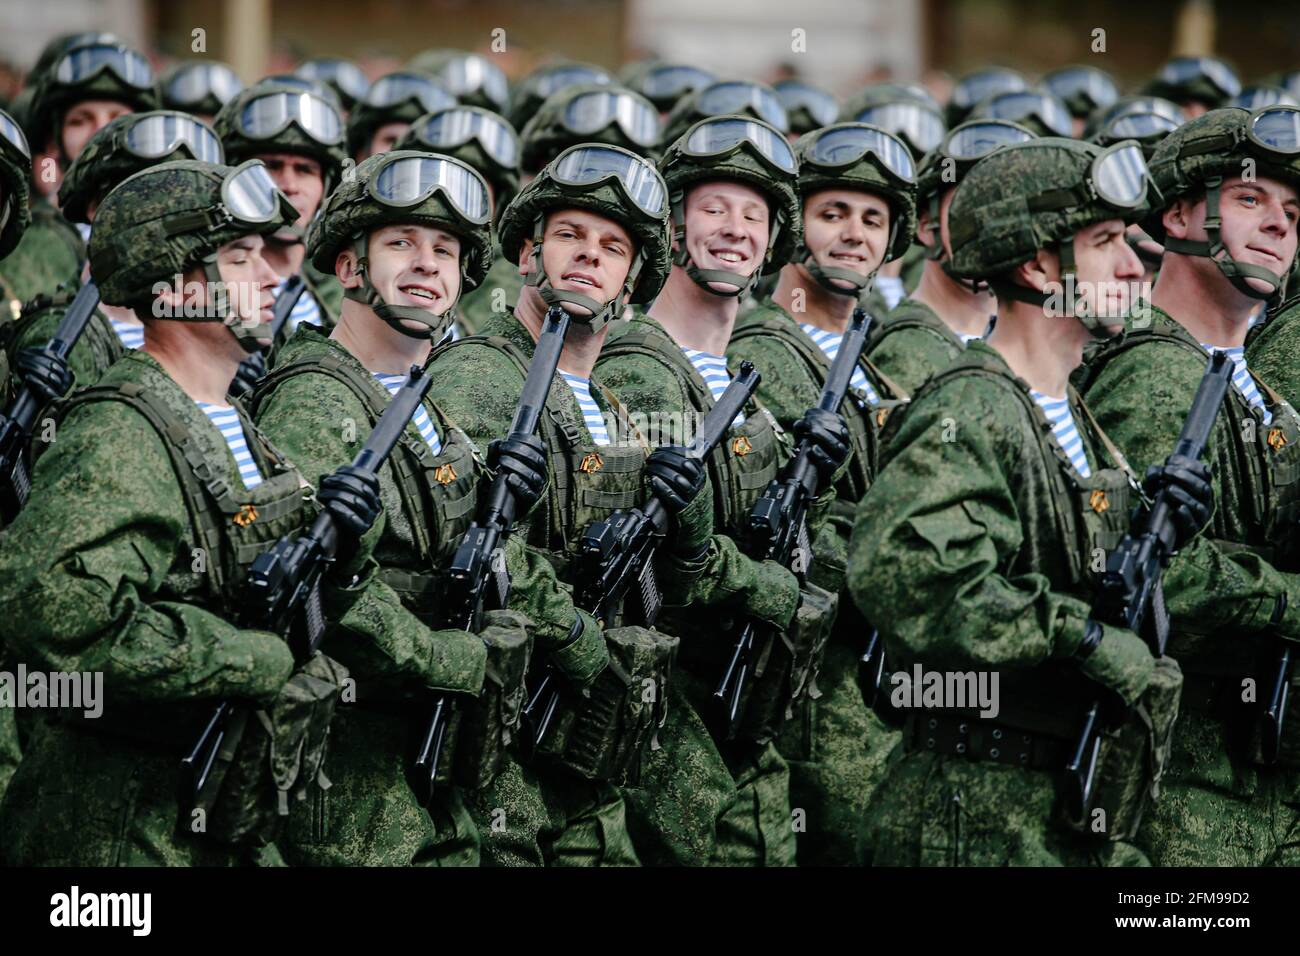 Moscow, Russia. 7th May, 2021. Servicemen march during a rehearsal of the Victory Day parade in Moscow, Russia, May 7, 2021. Russia will hold military parades across the country to commemorate the 76th anniversary of the Soviet victory in the Great Patriotic War on May 9. Credit: Evgeny Sinitsyn/Xinhua/Alamy Live News Stock Photo